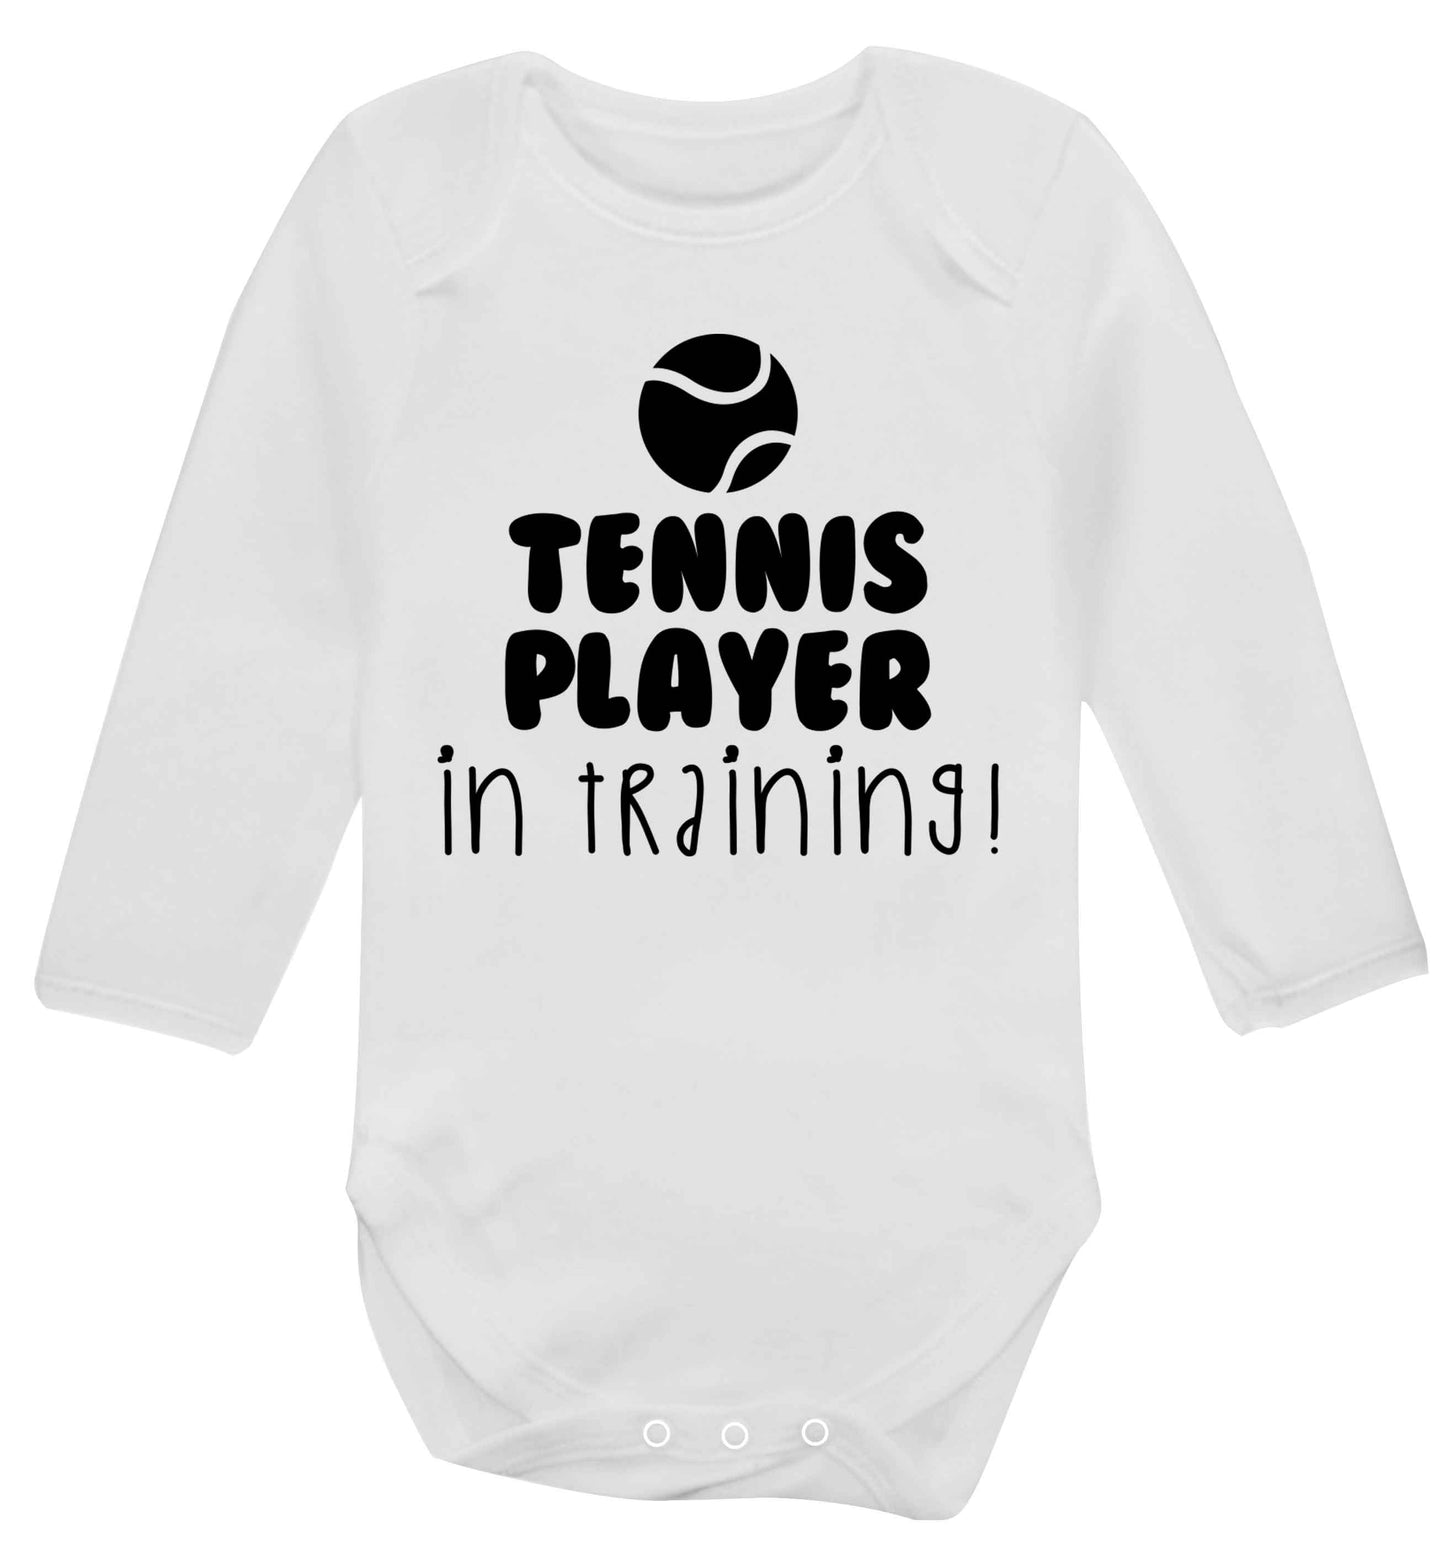 Tennis player in training Baby Vest long sleeved white 6-12 months